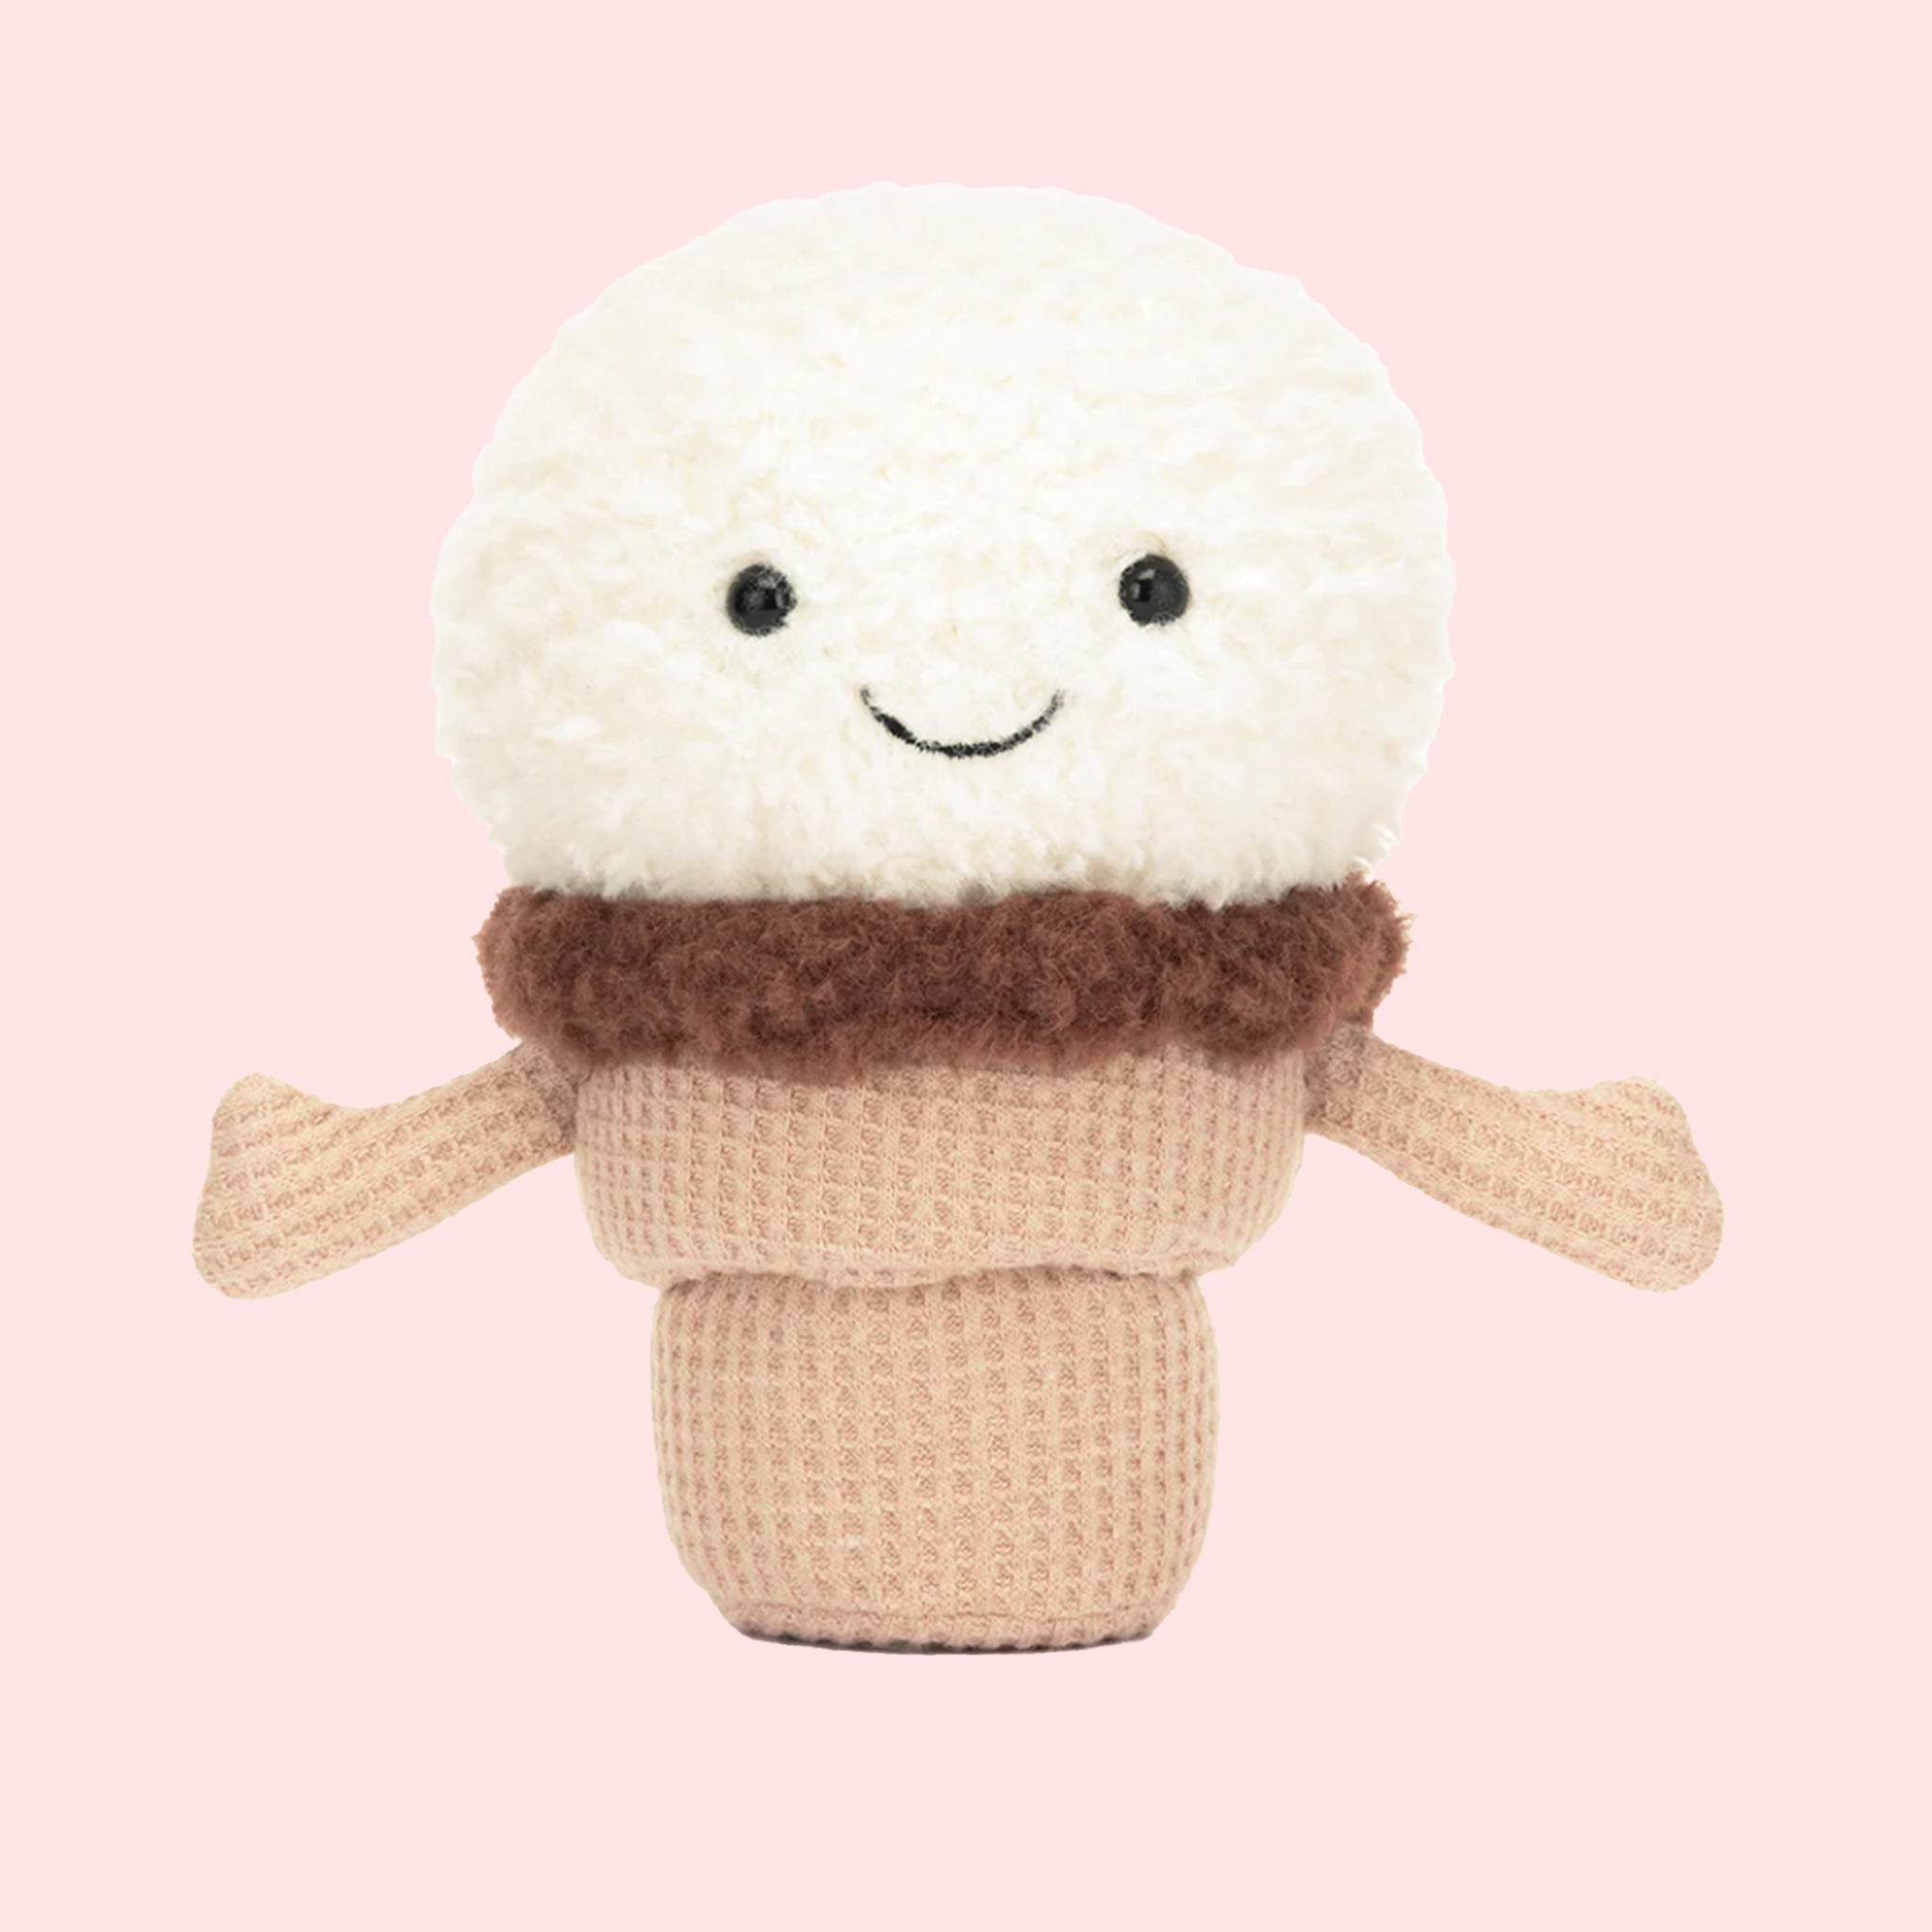 On a pink background is a photo of an ice cream cone shaped stuffed animal with a smiling face and little waffle cone textured arms. 